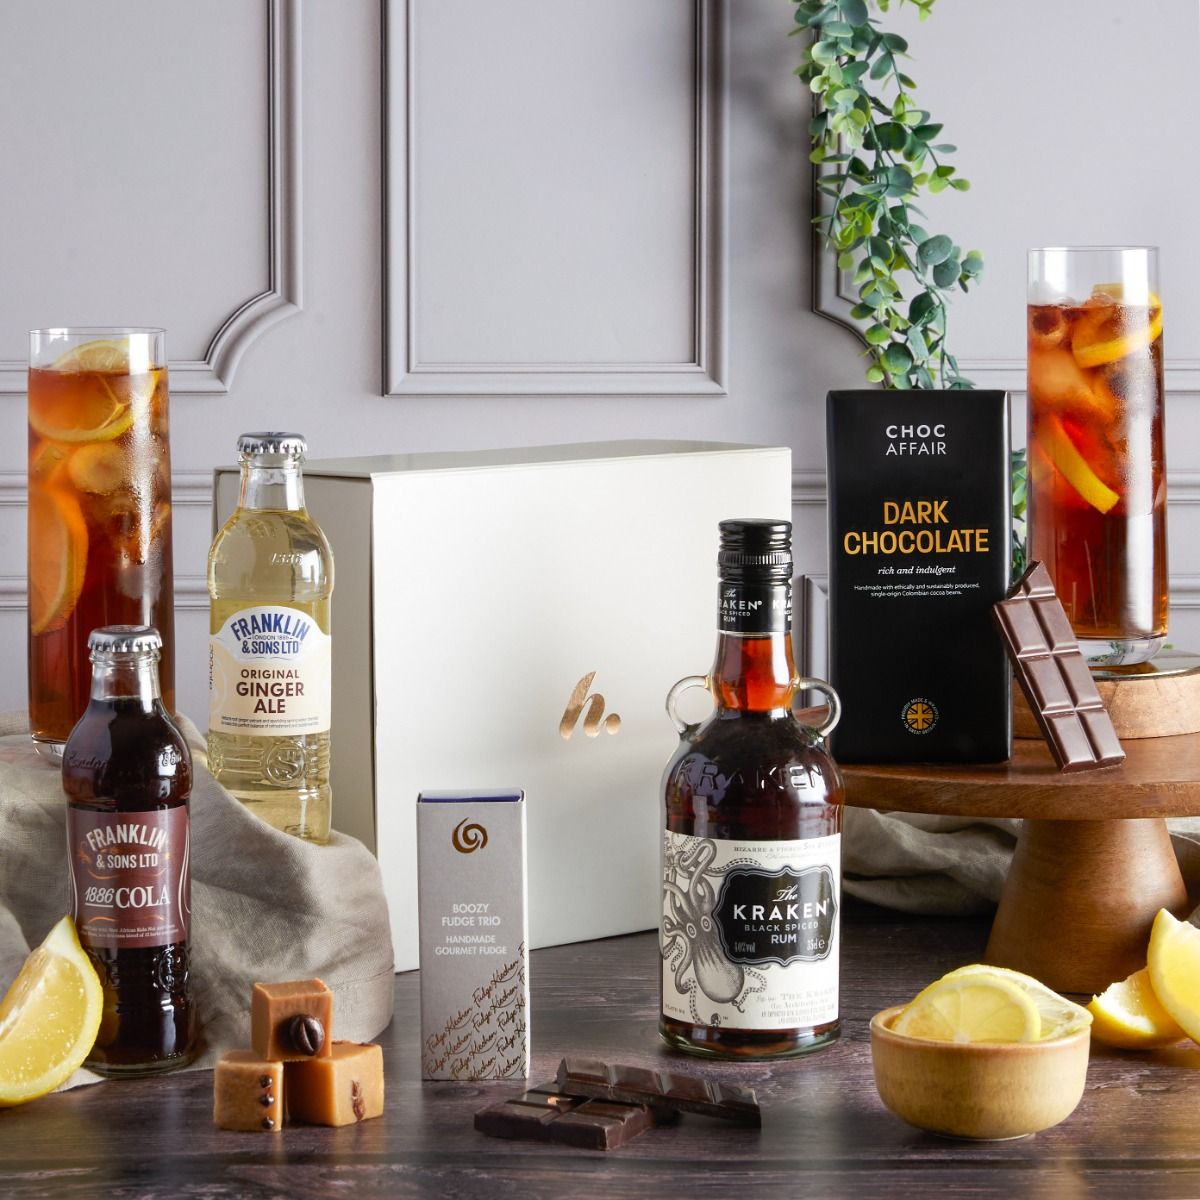 The Kraken Spiced Rum & Chocolate Gift with contents on display as a father's day gift idea